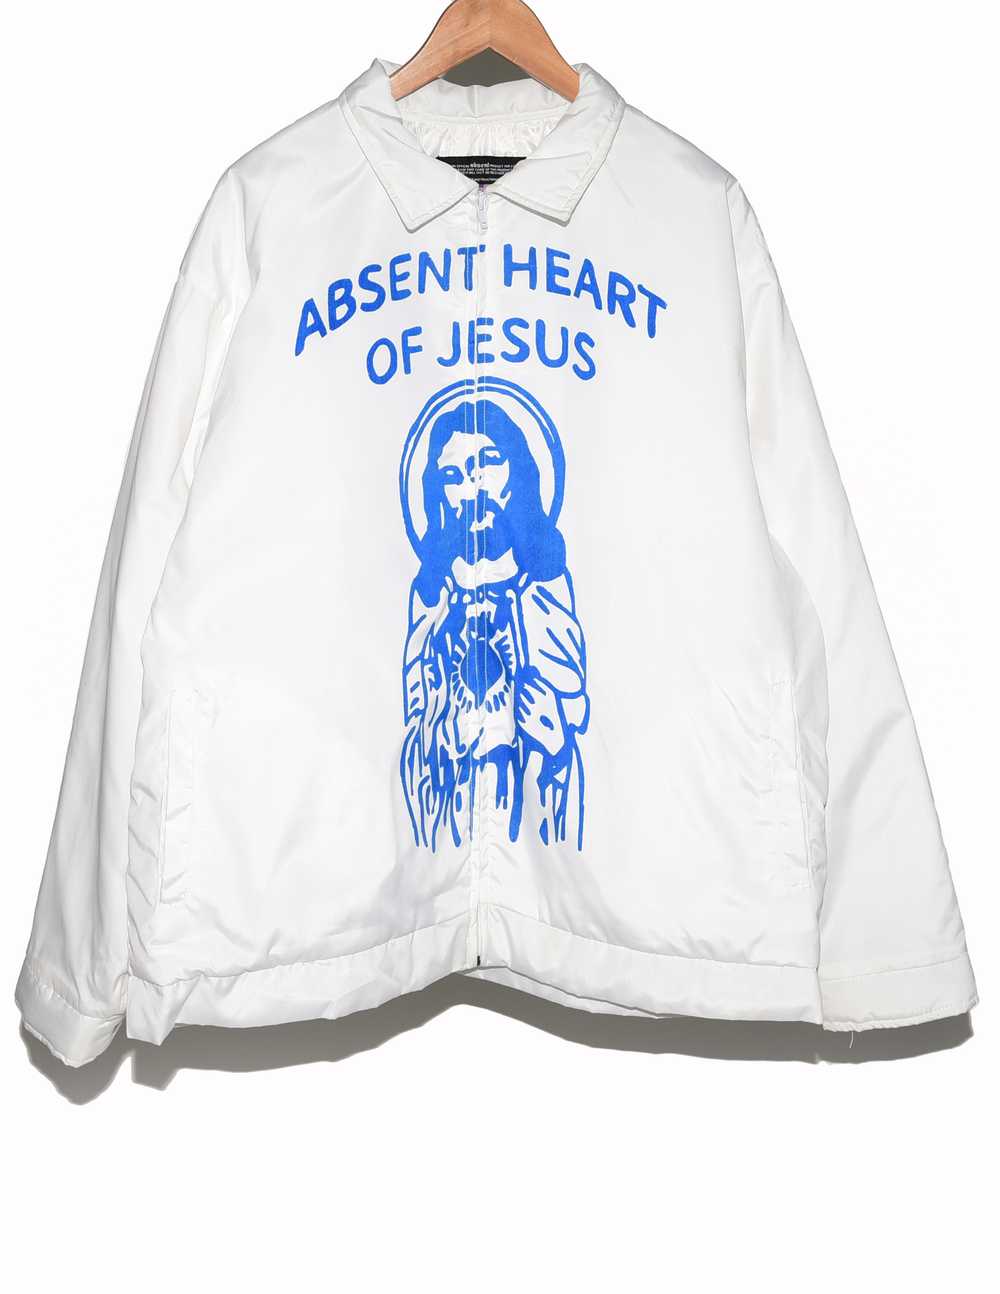 Absent Heart of Jesus Bomber - image 1